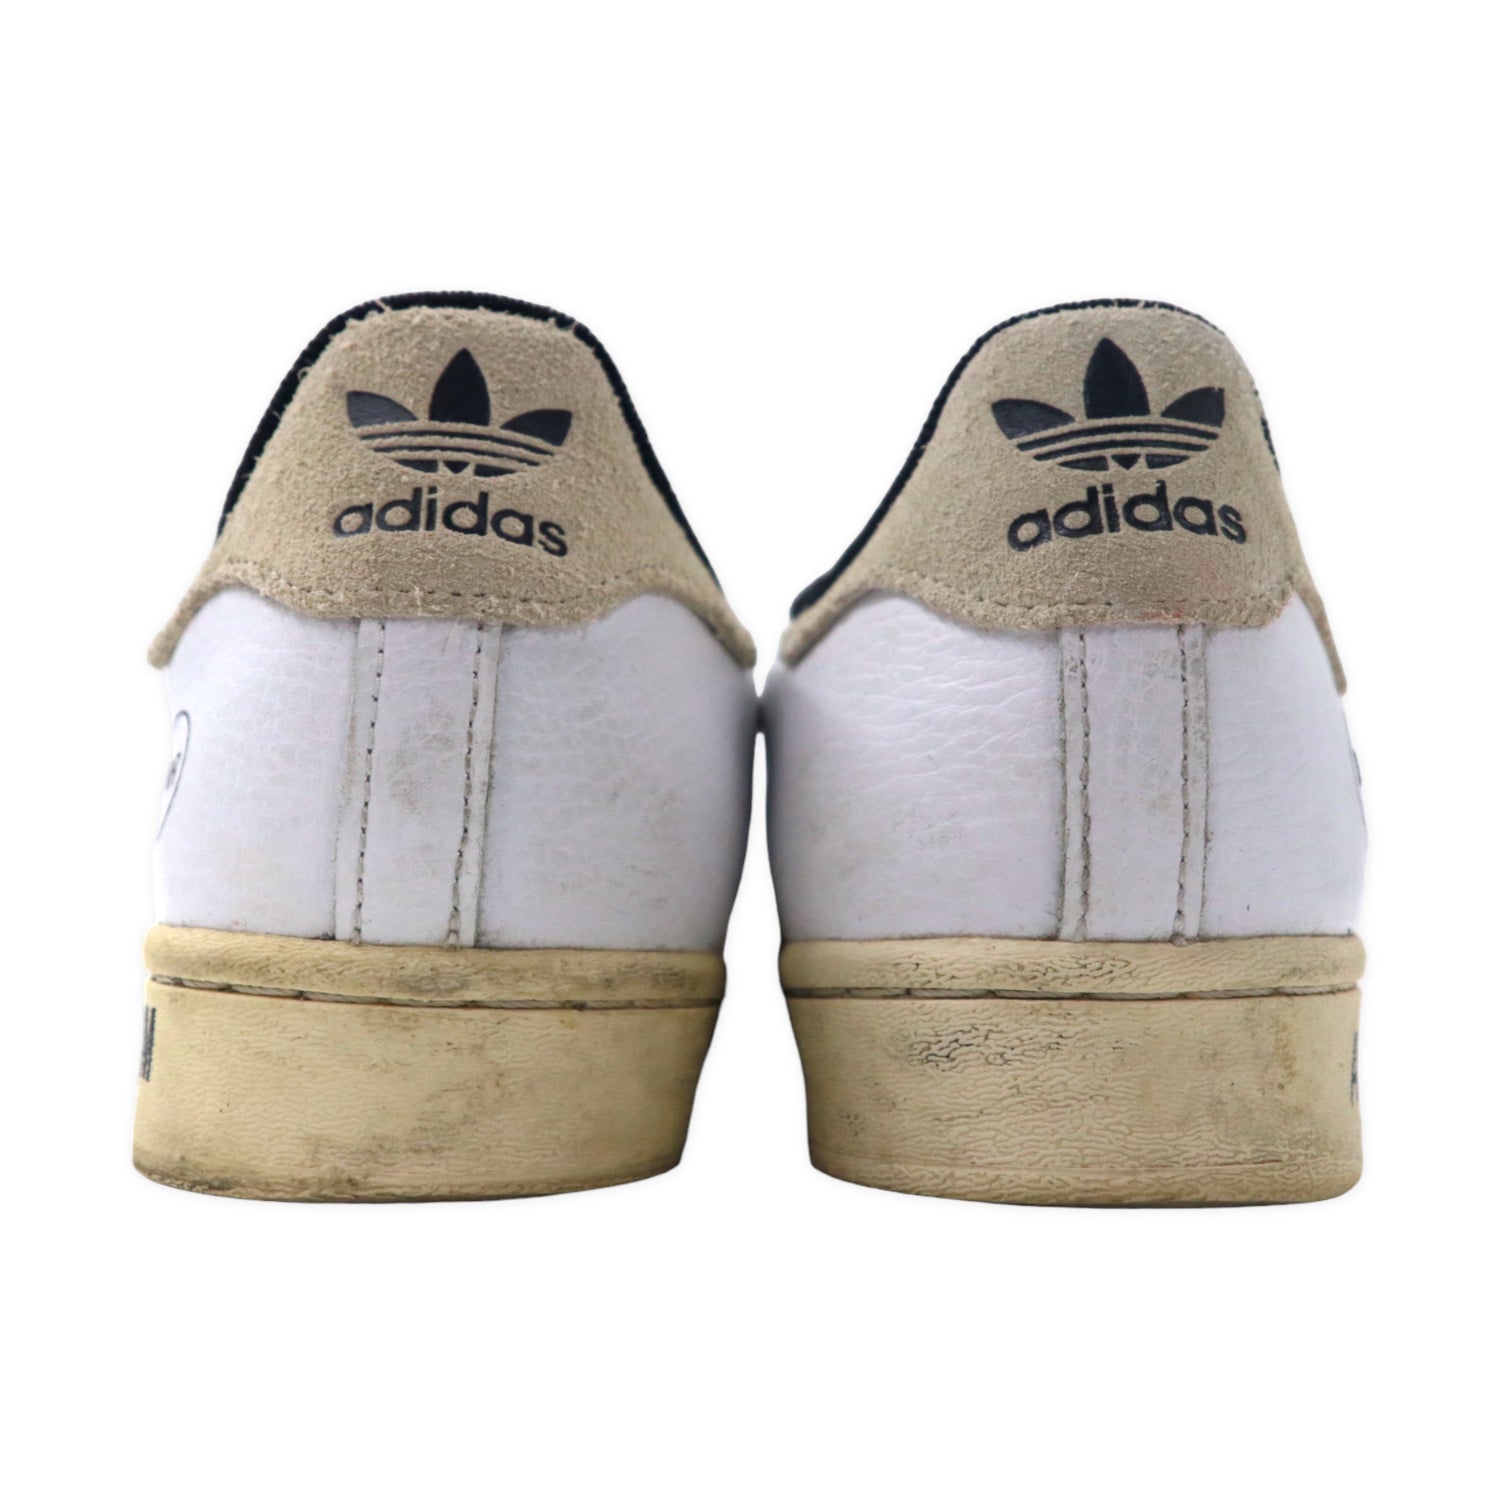 Adidas Originals Superstar Sneakers US9.5 White Leather 3 Striped 